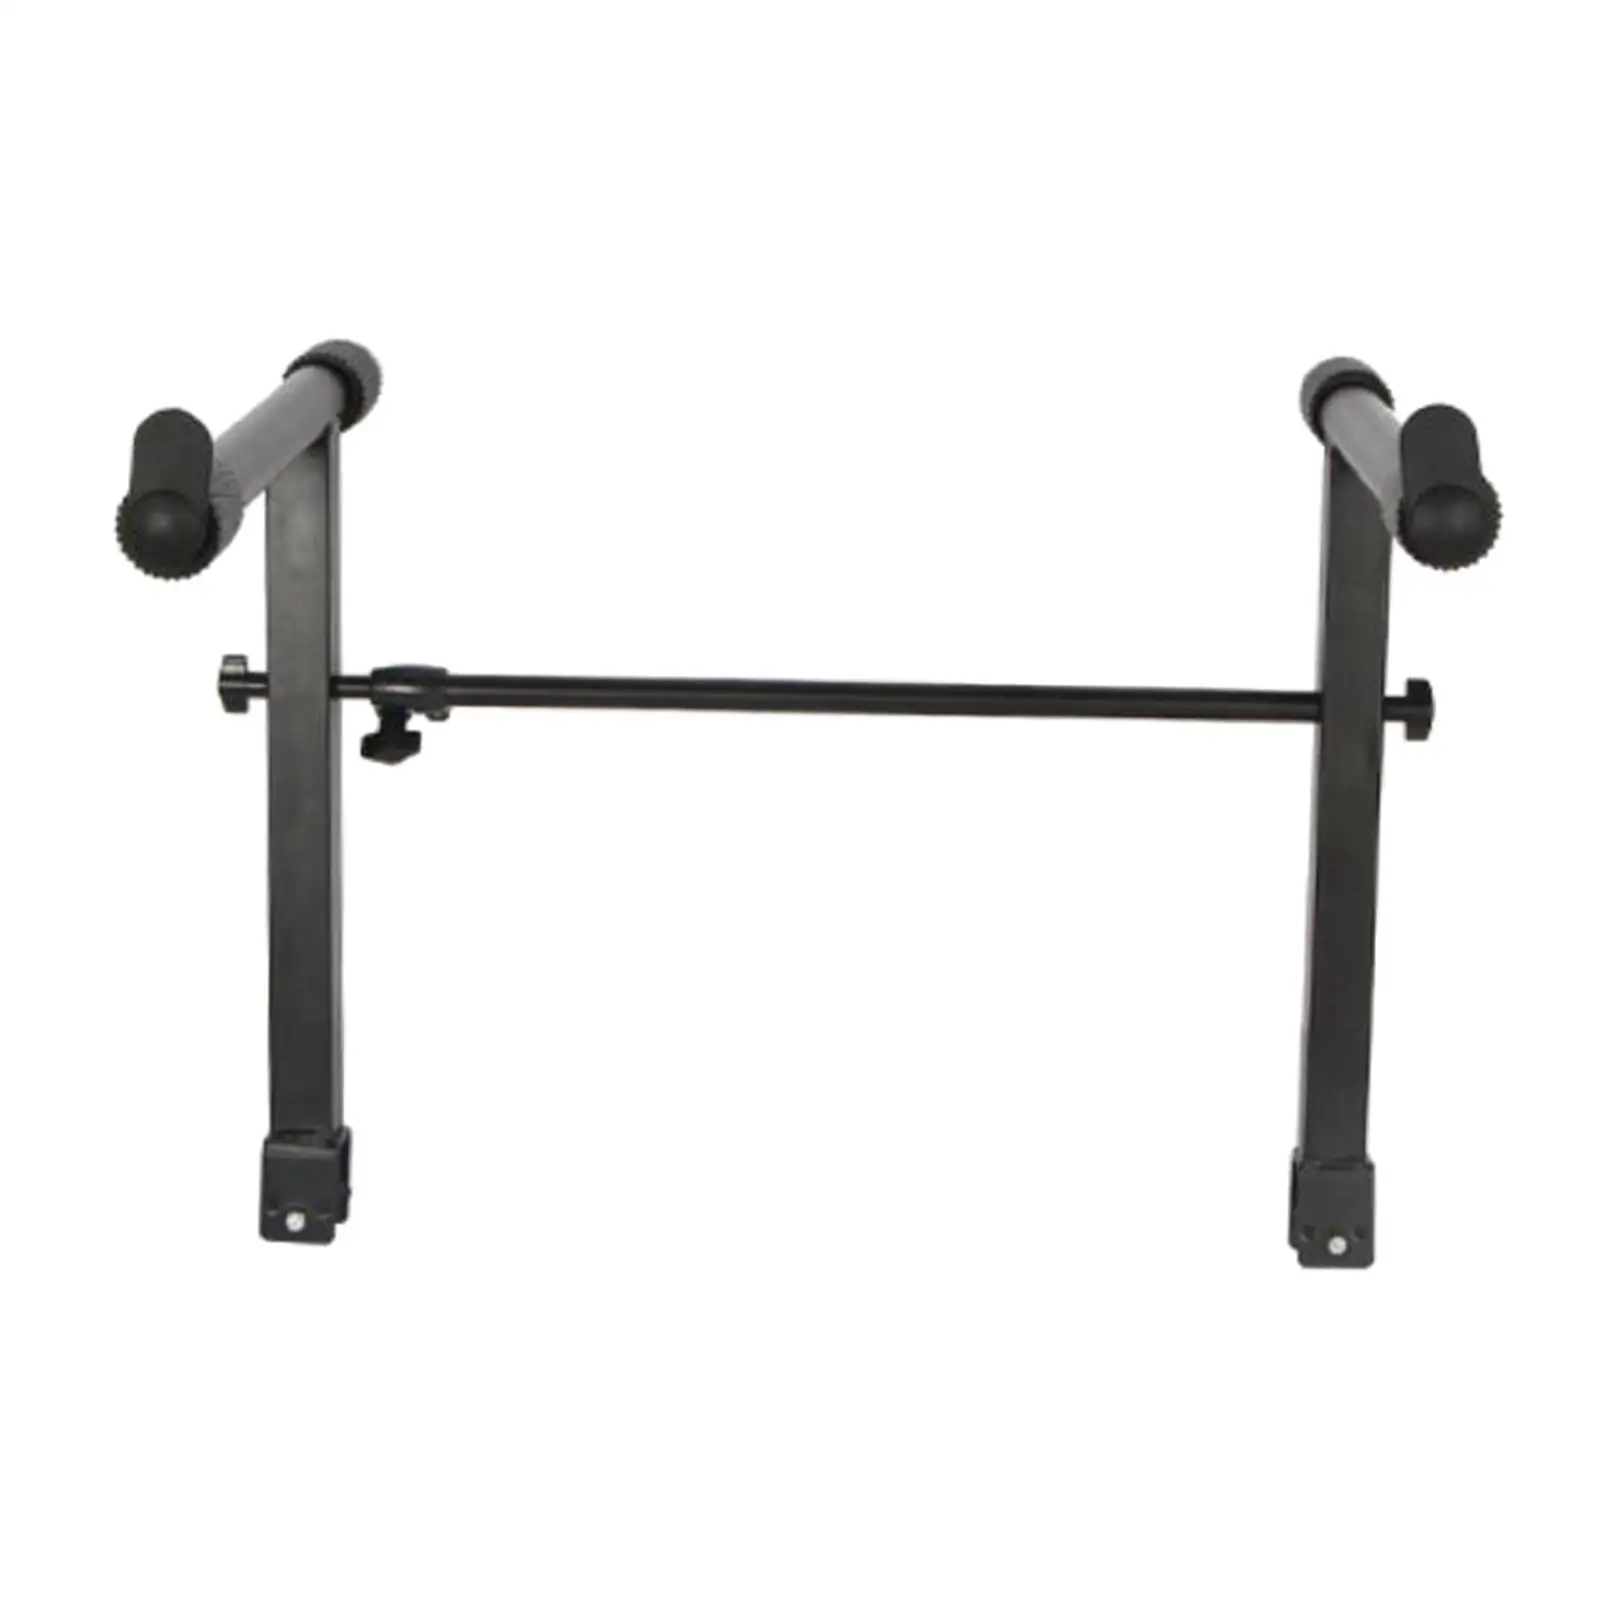 Musical Keyboard Stand Support Holder for Keyboard Instrument Accessories